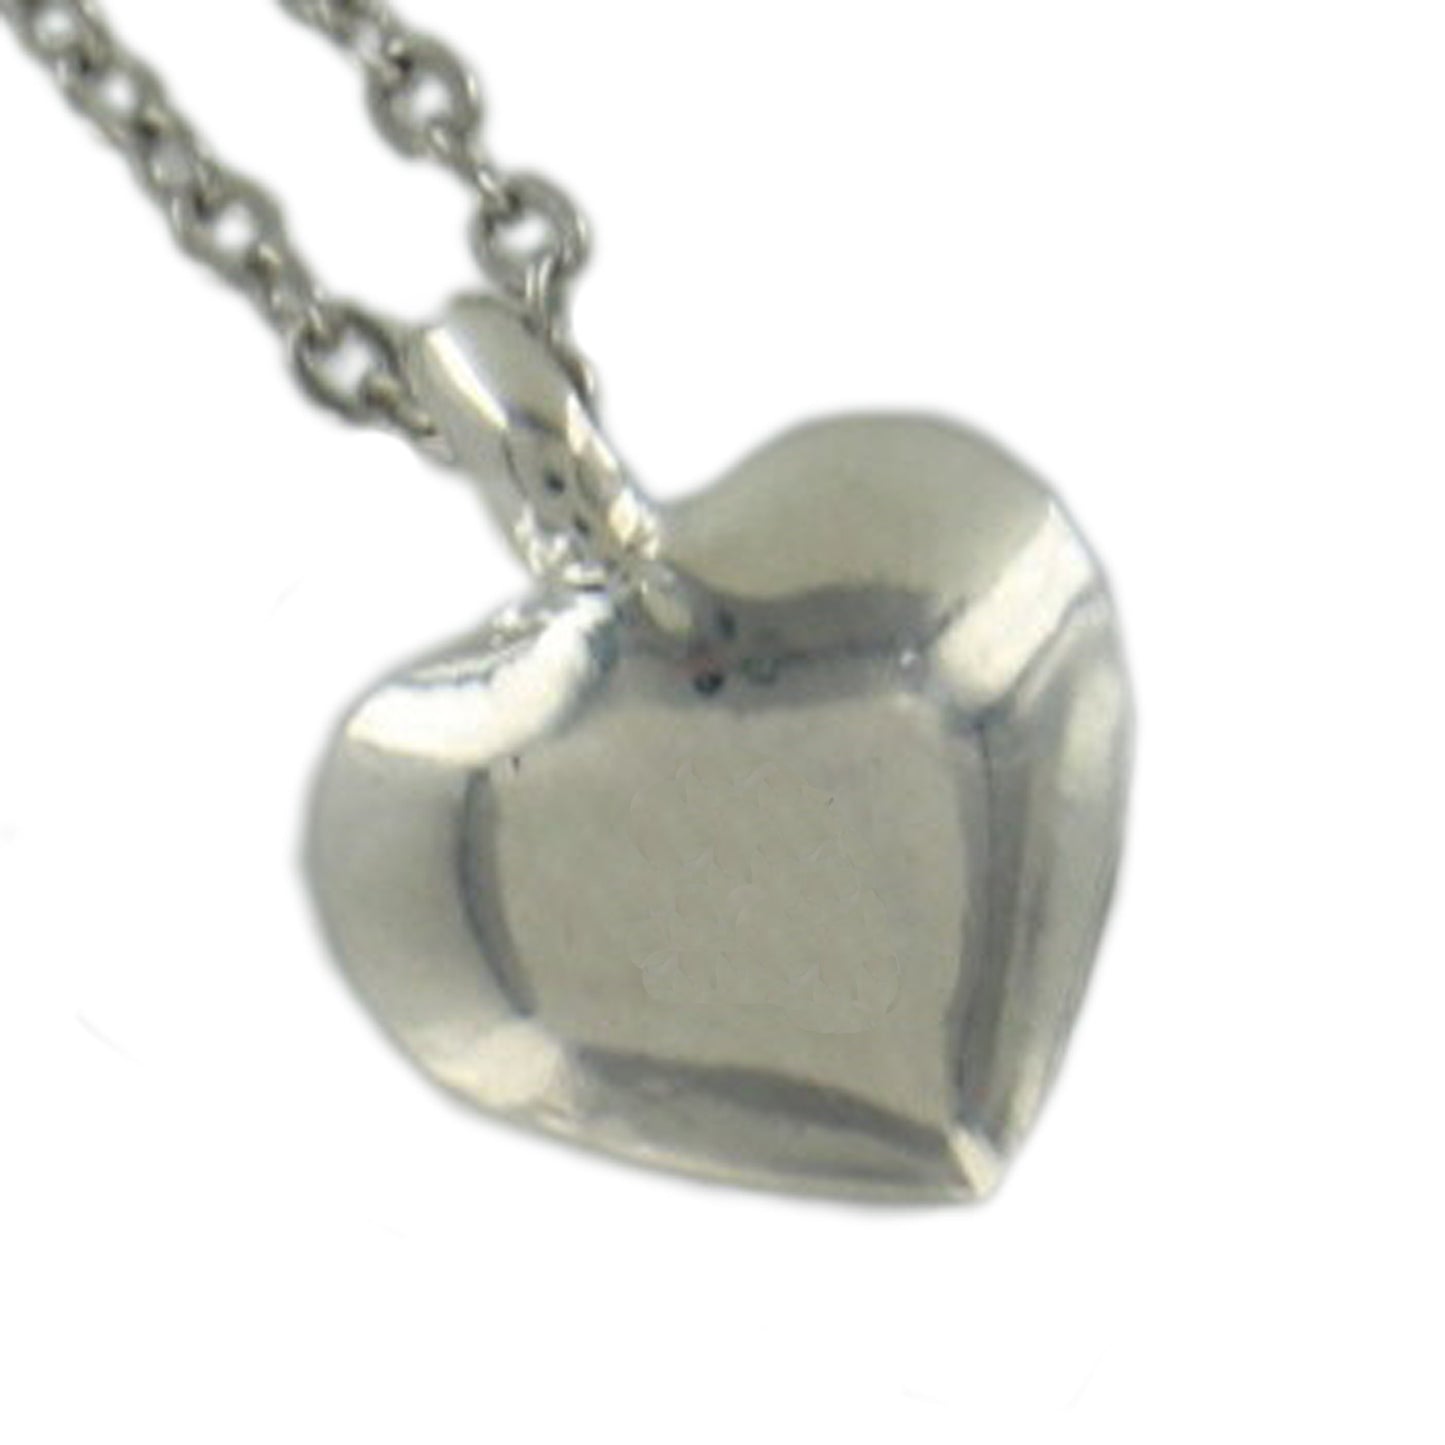 Blue Crystal Heart Silver Tone Heart Charm Pendant Necklace 18"